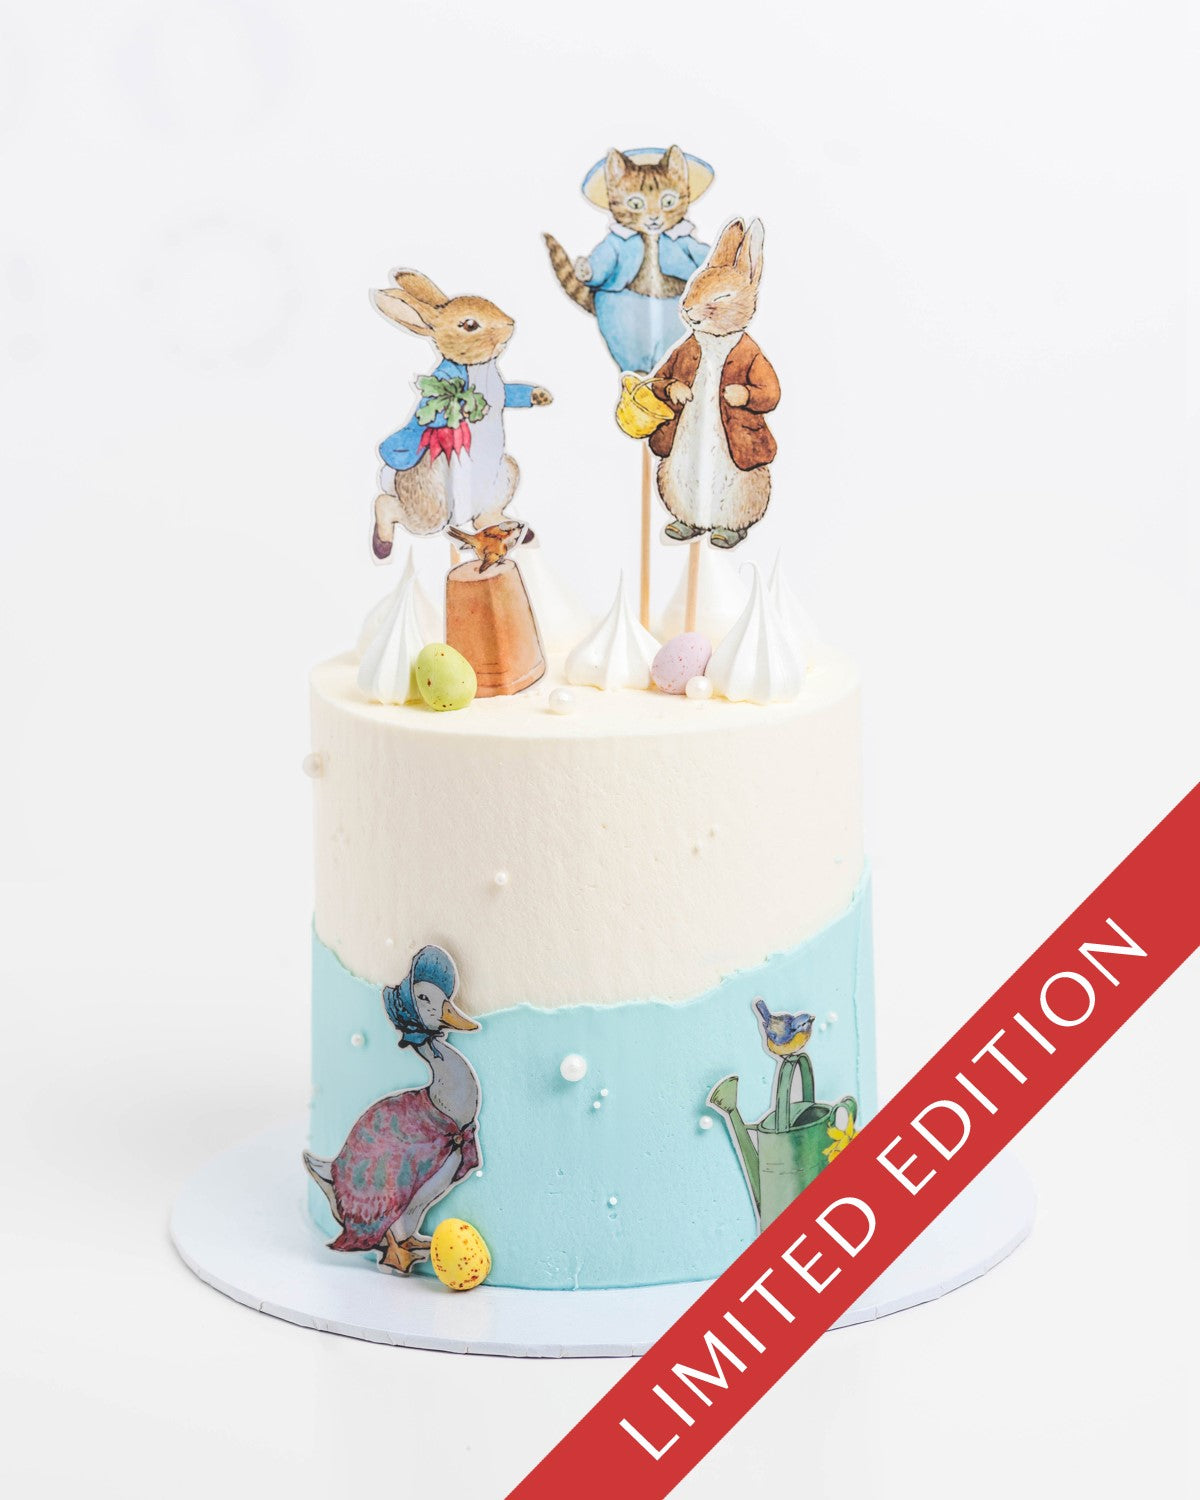 Peter Rabbit - Cake Affair, cakes for every occasion